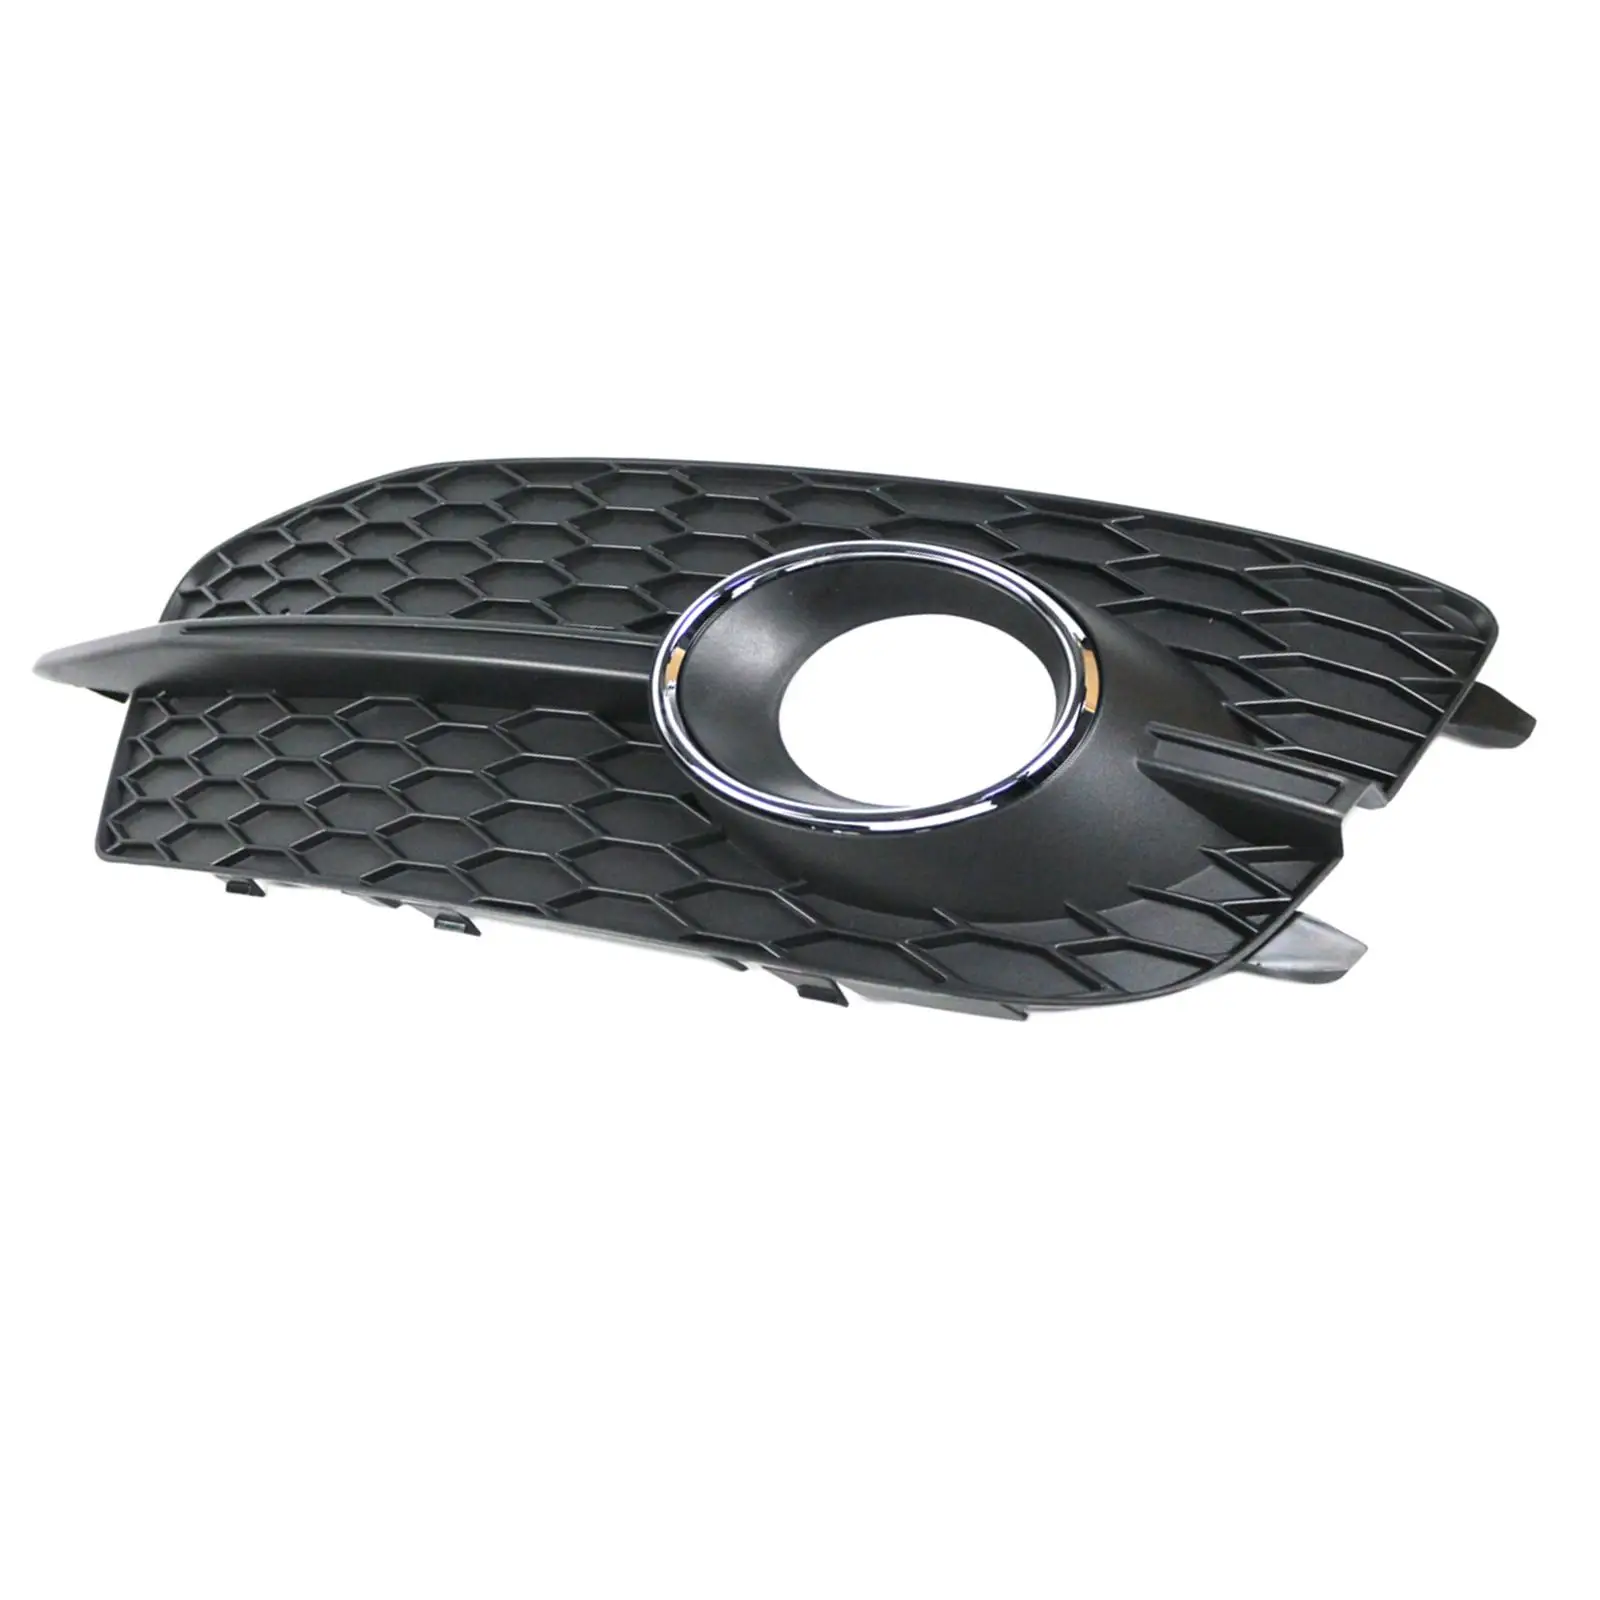 Front Fog Light Cover Grill Decorative Body Fittings Mesh Grille for Audi Q3 S Line Replaces Accessory Parts Protection